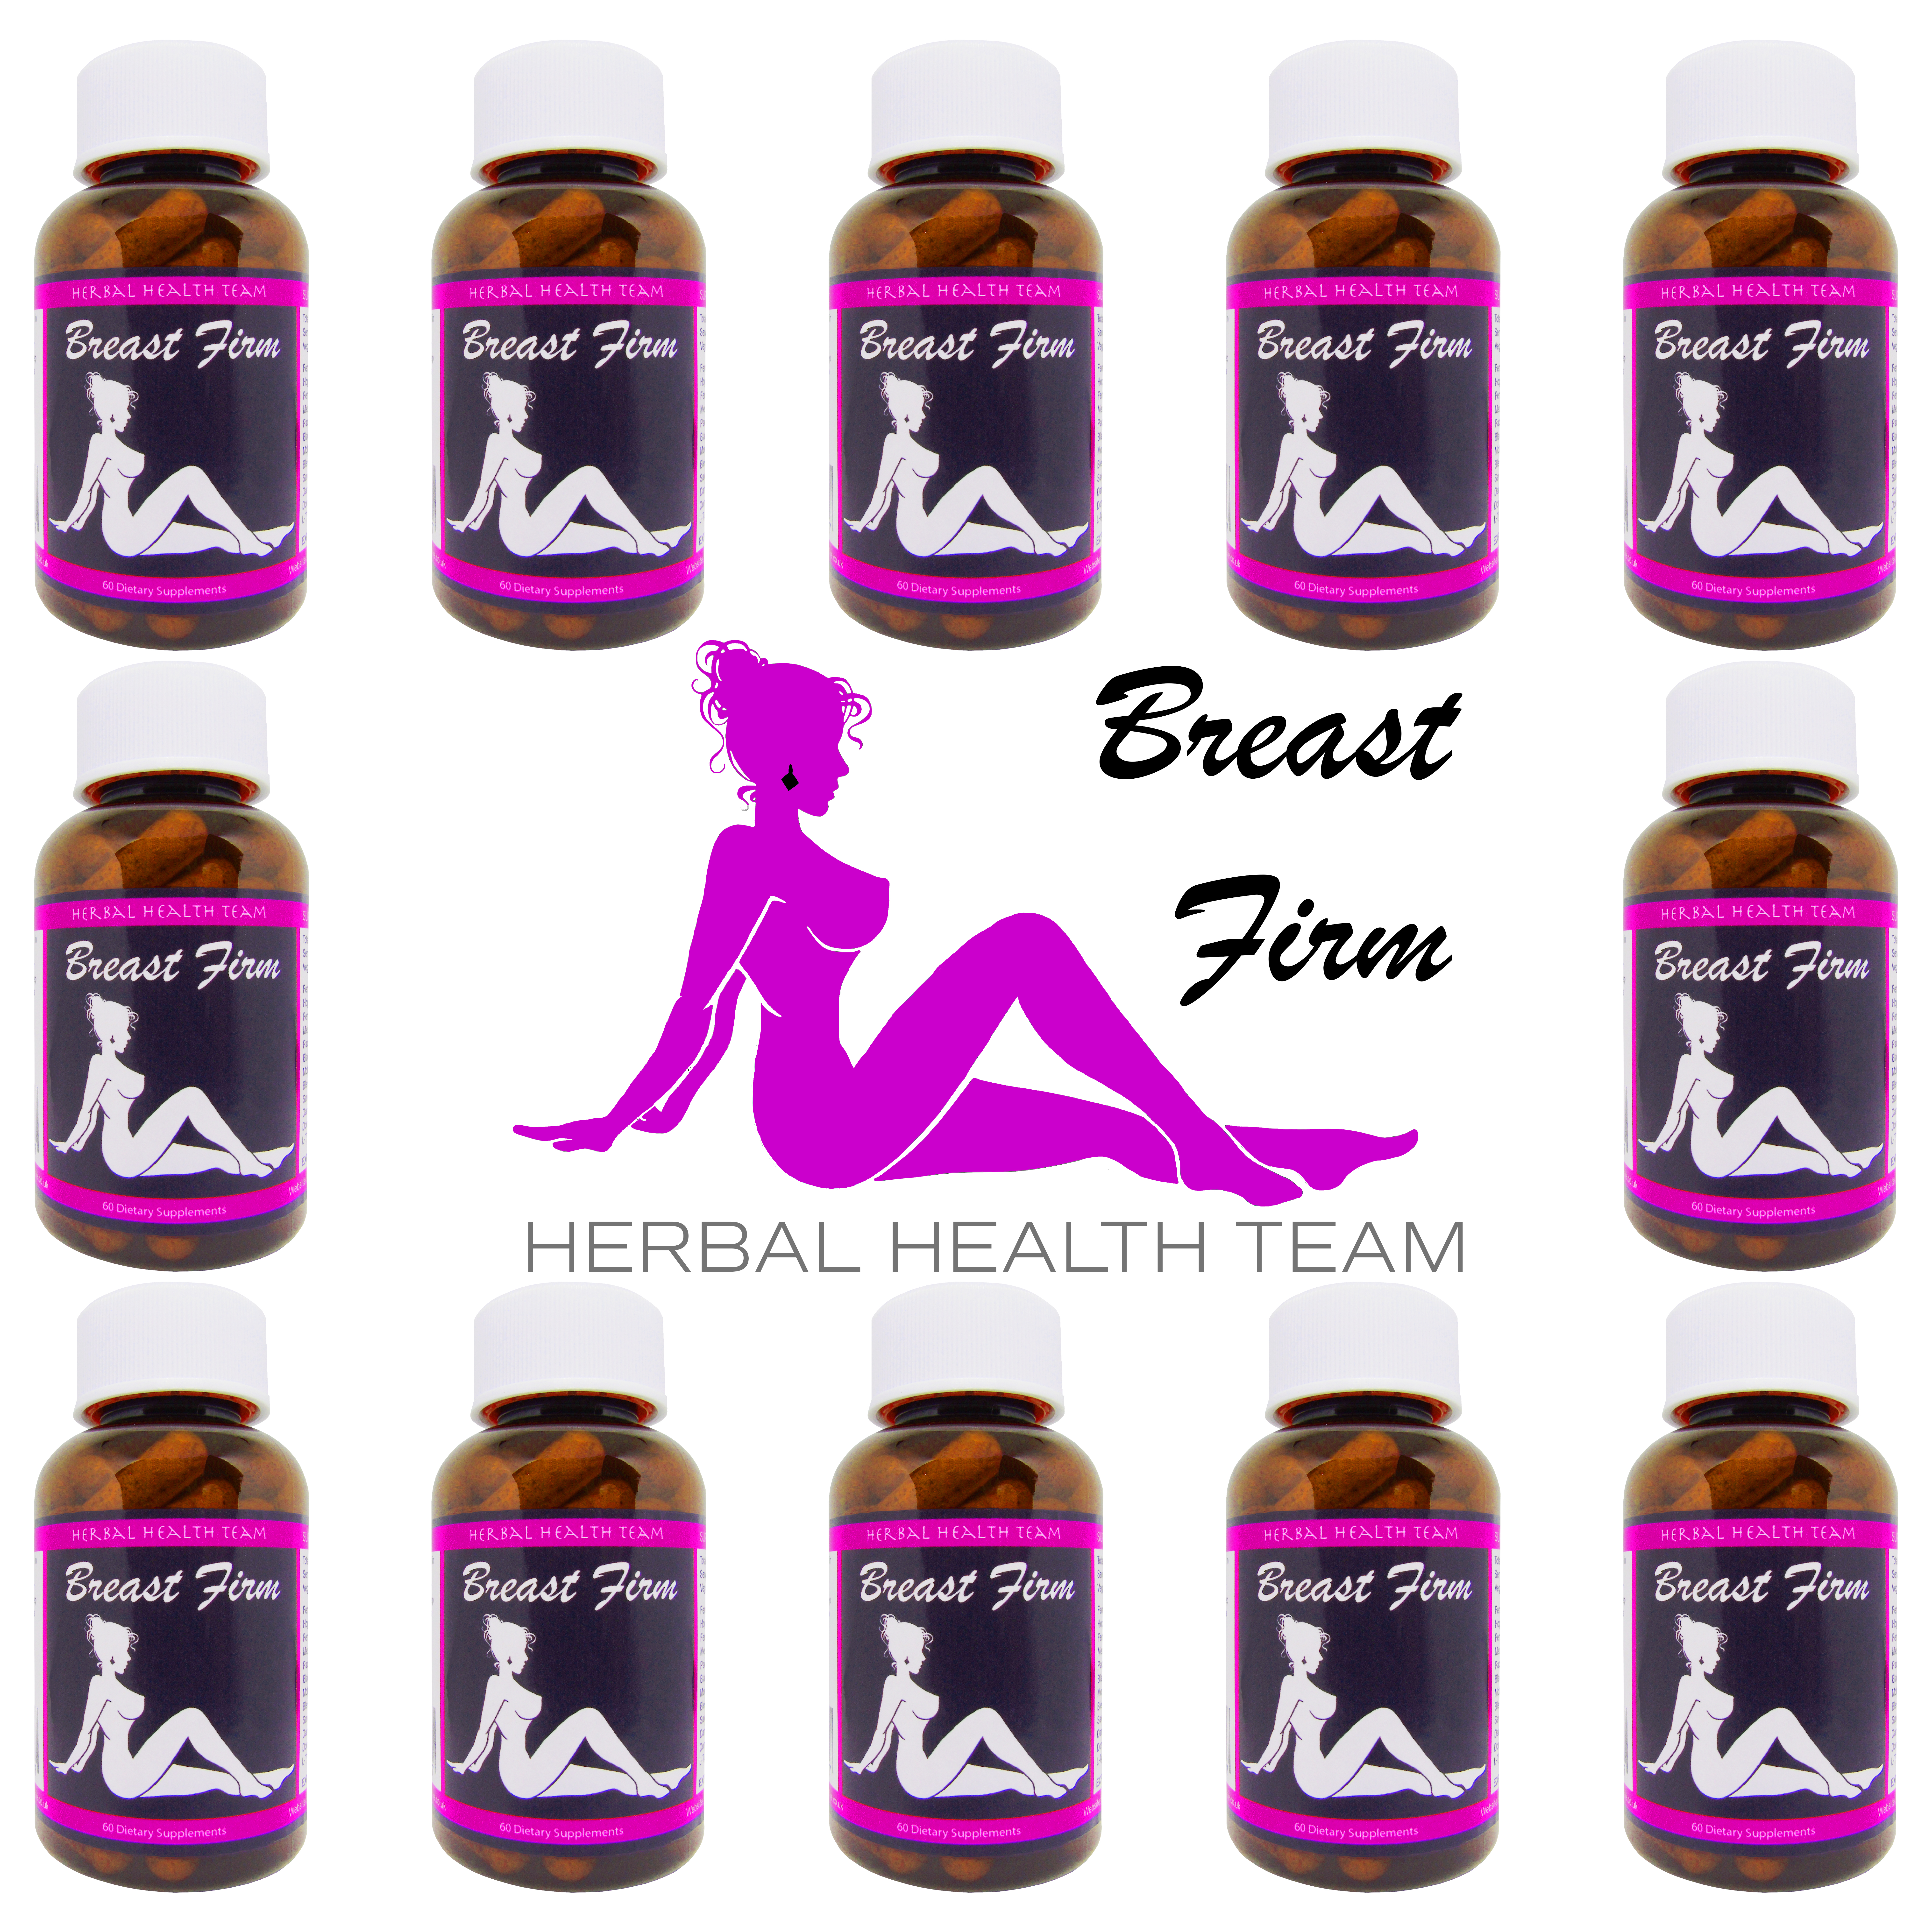 breast firm herbal health team 12 month supply